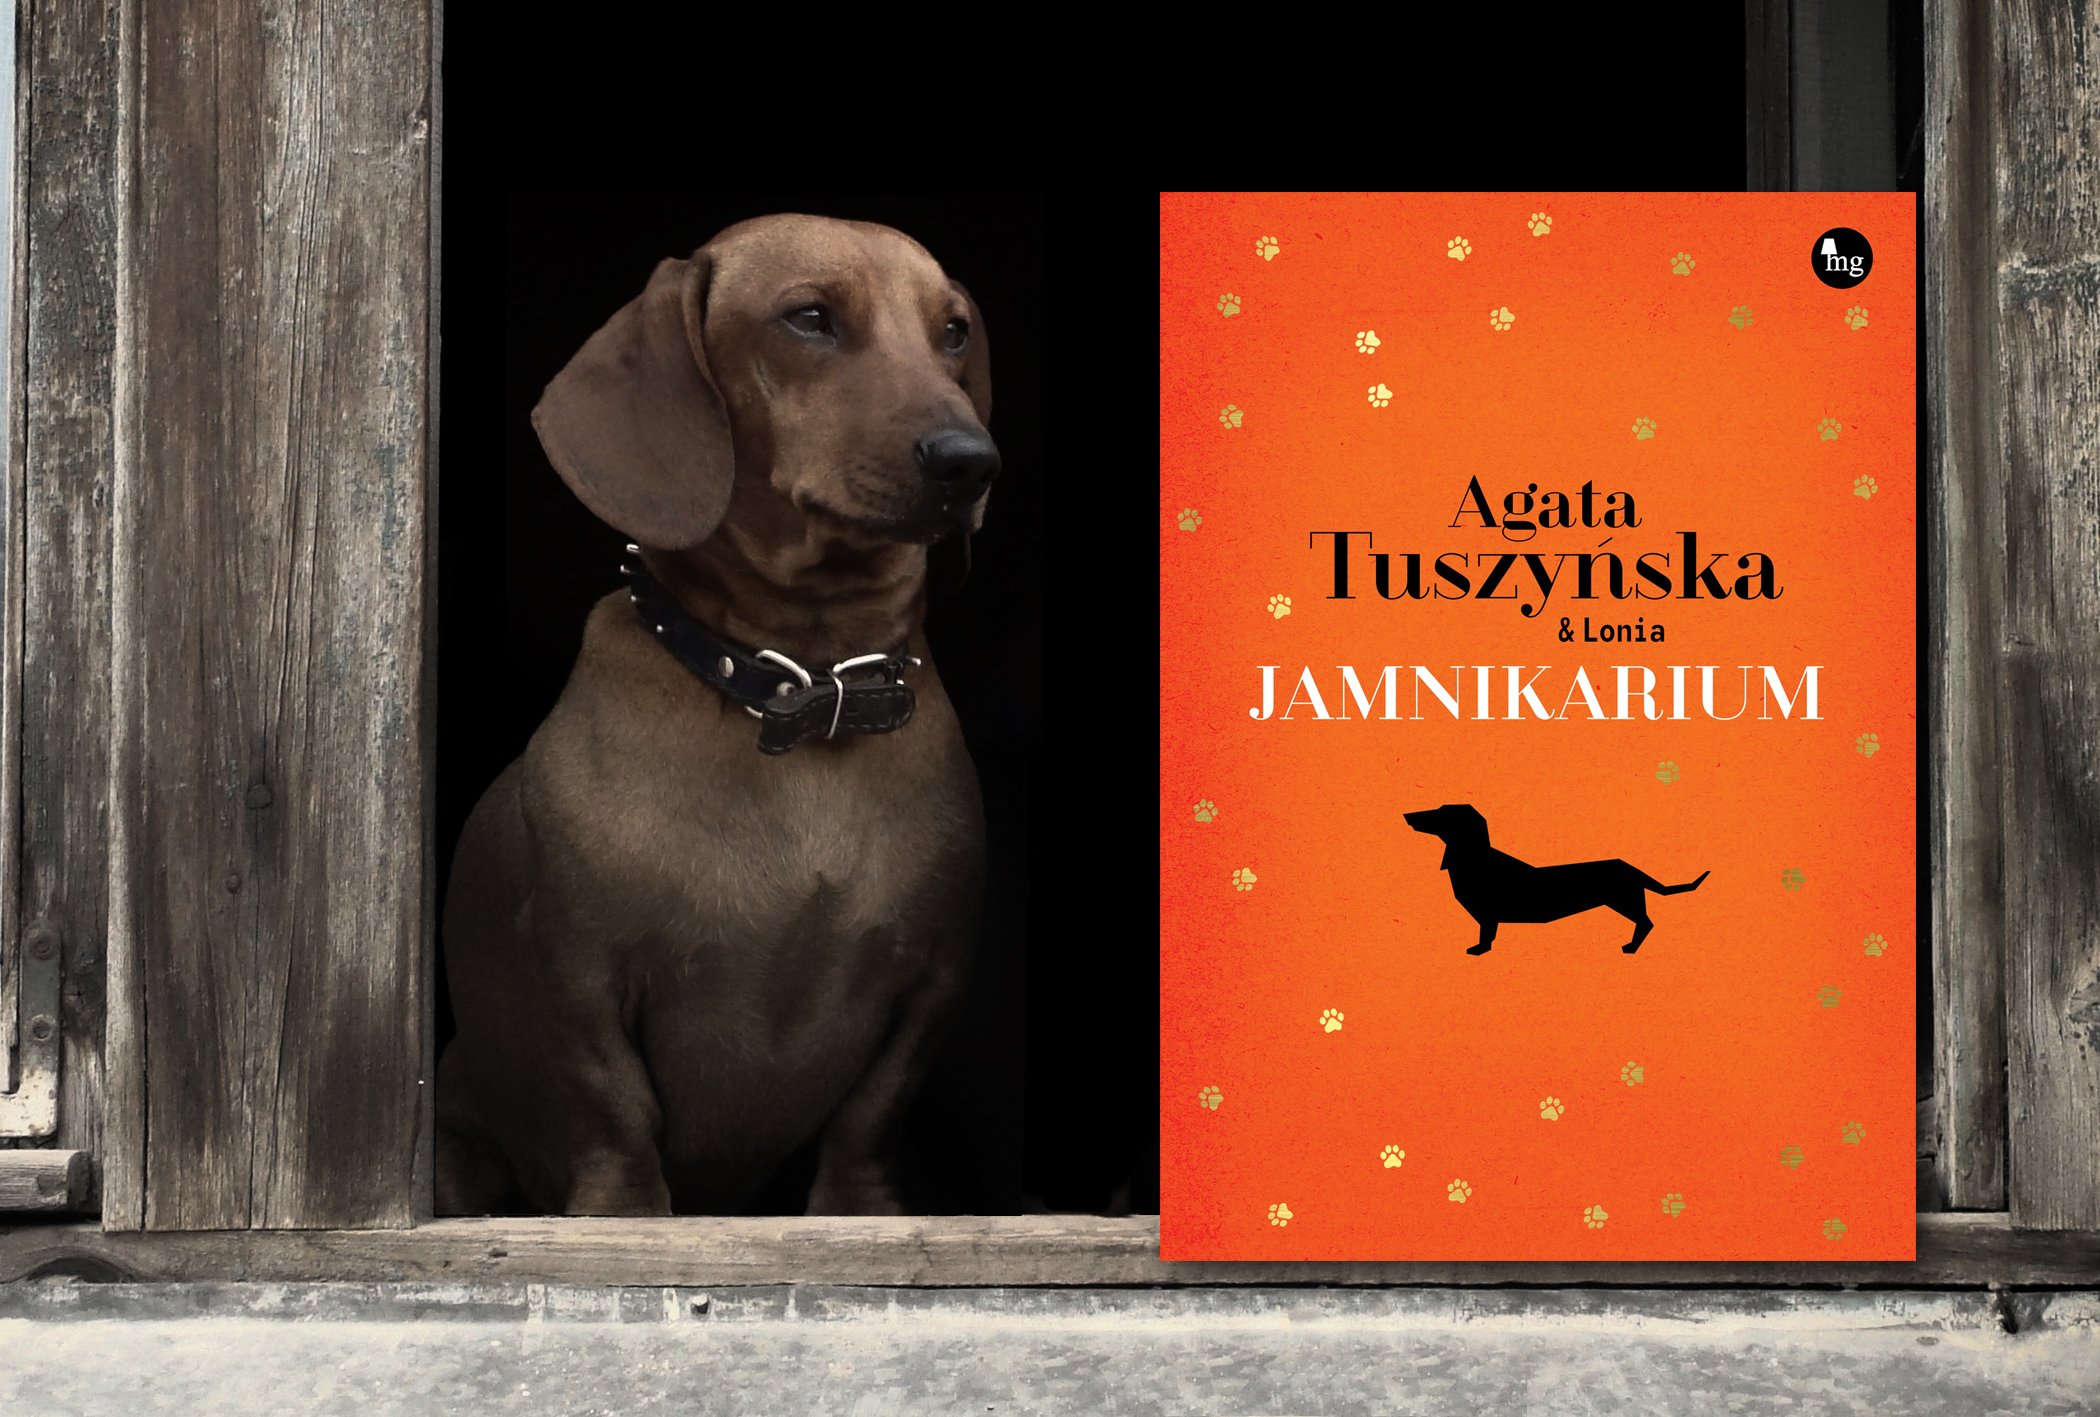 Pictured: a dachshund and the book cover